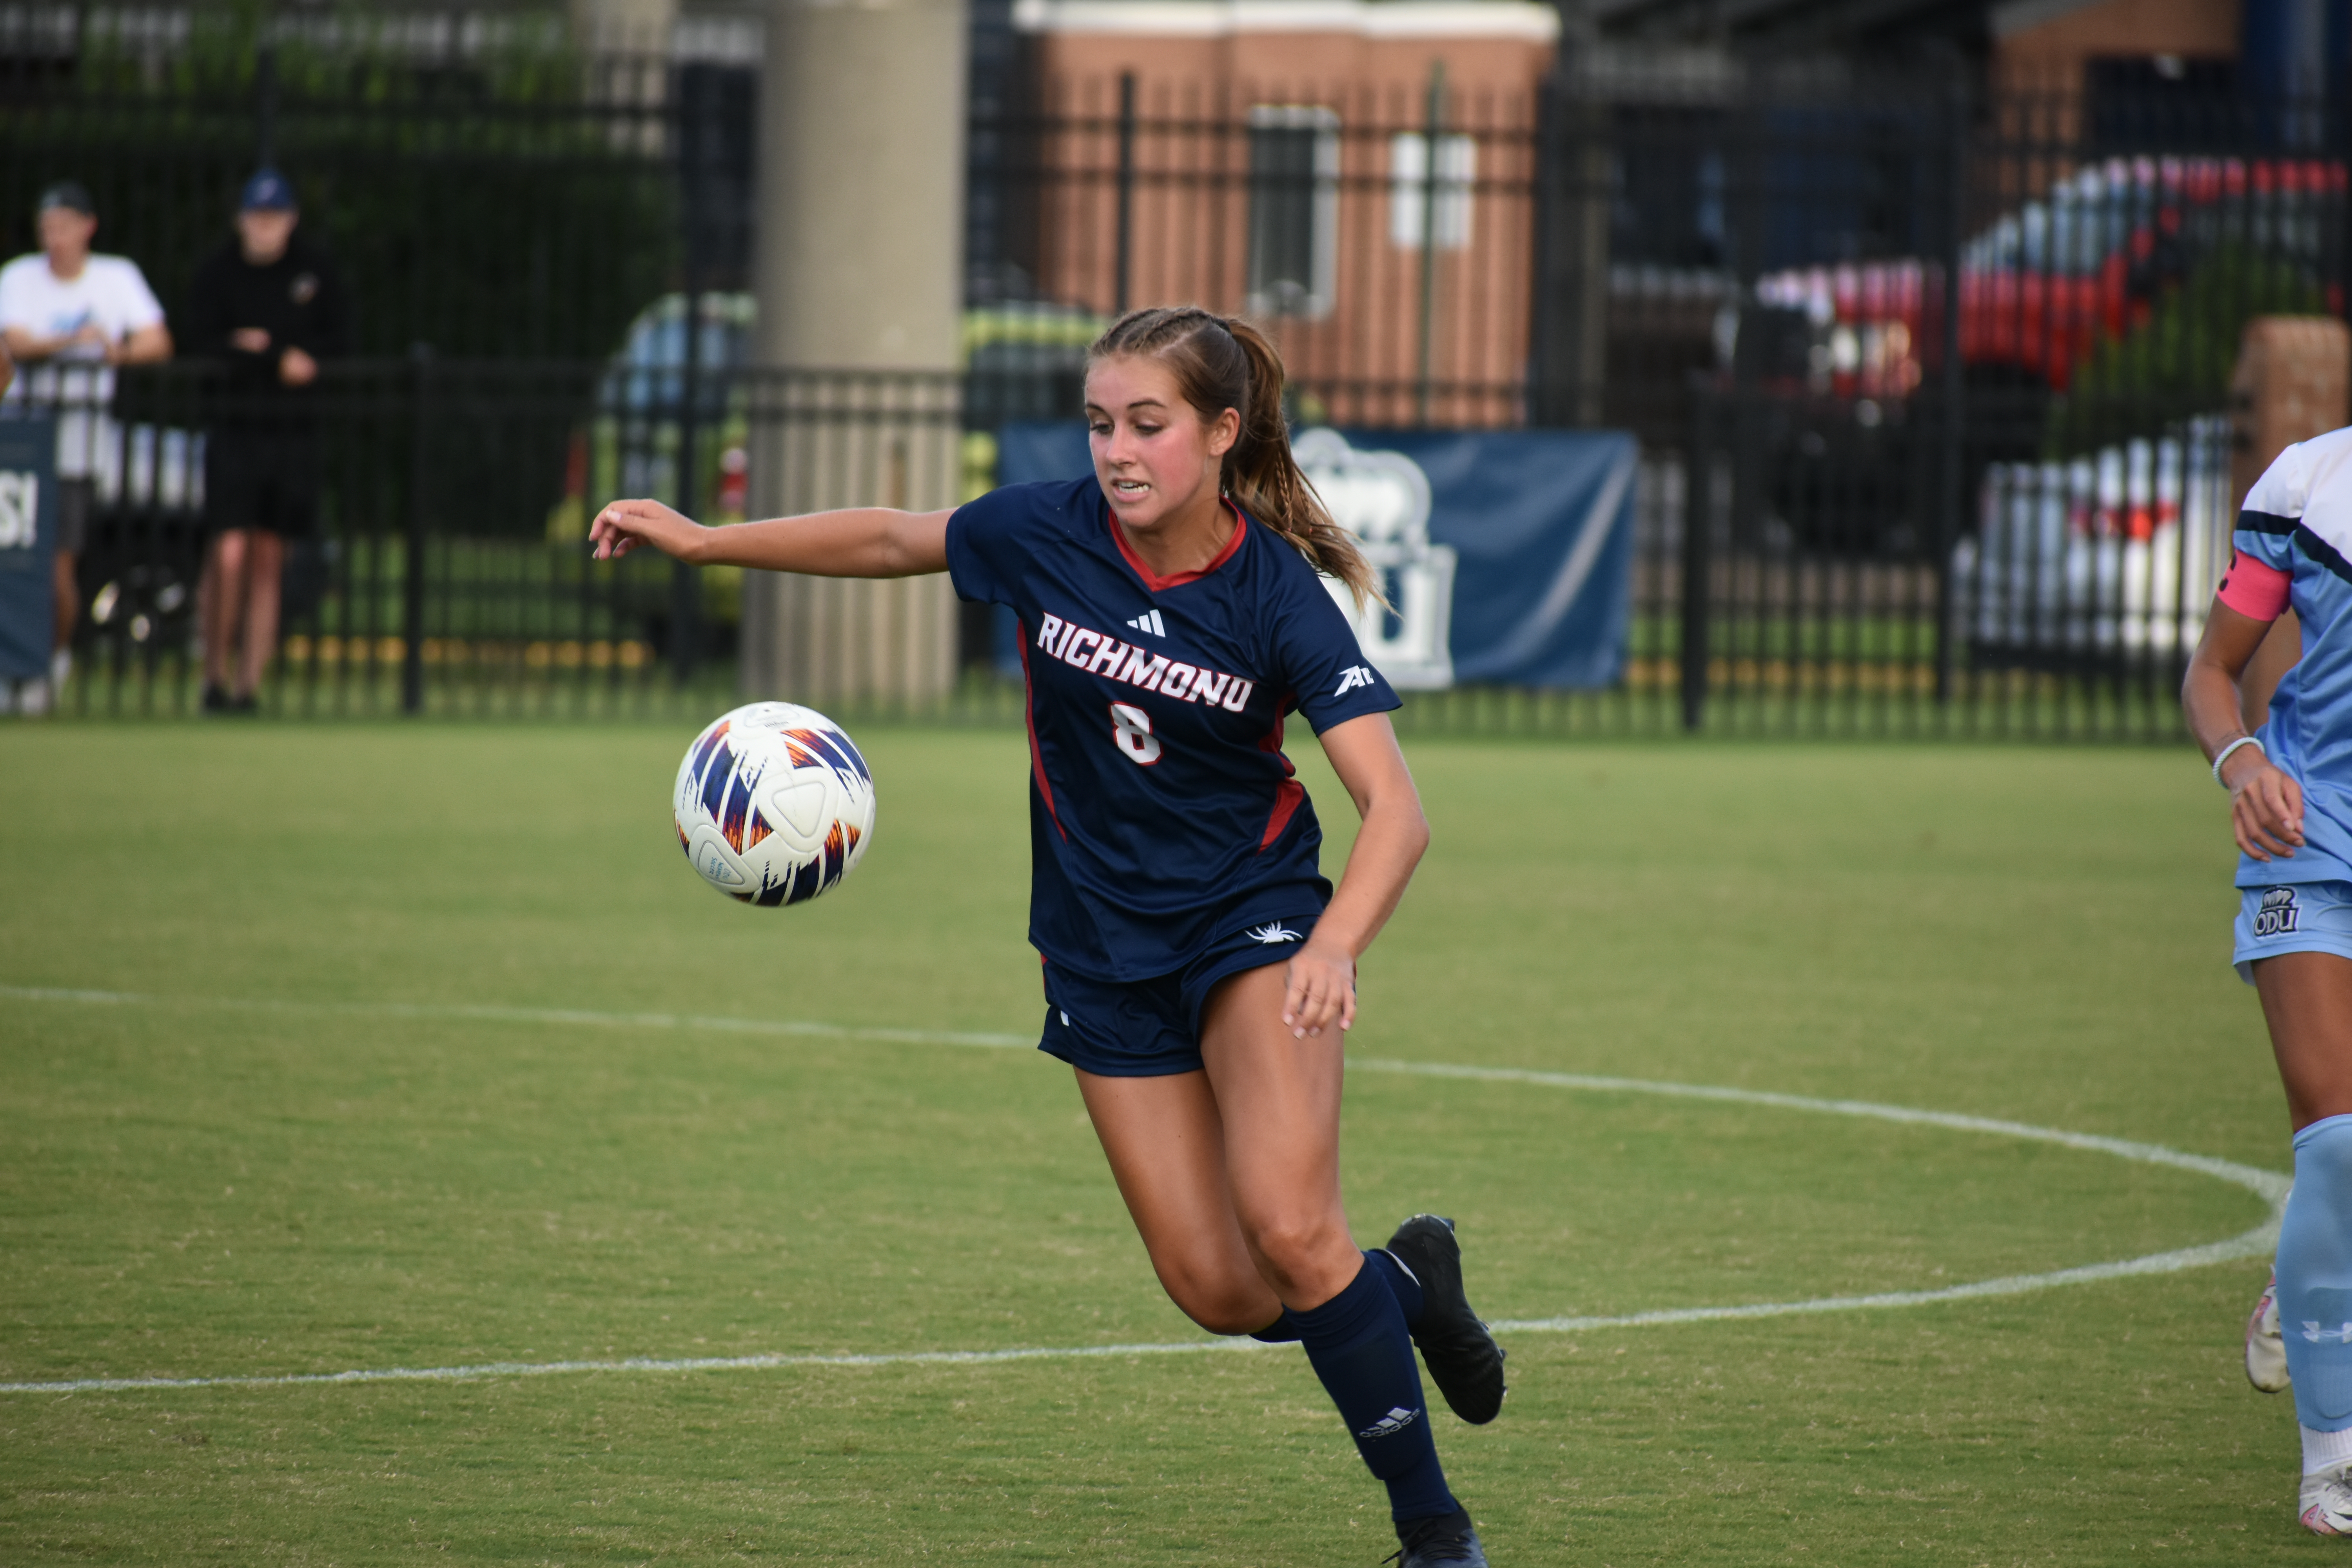 University of Richmond midfielder Kiley Fitzgerald commits to W League RVA featured image